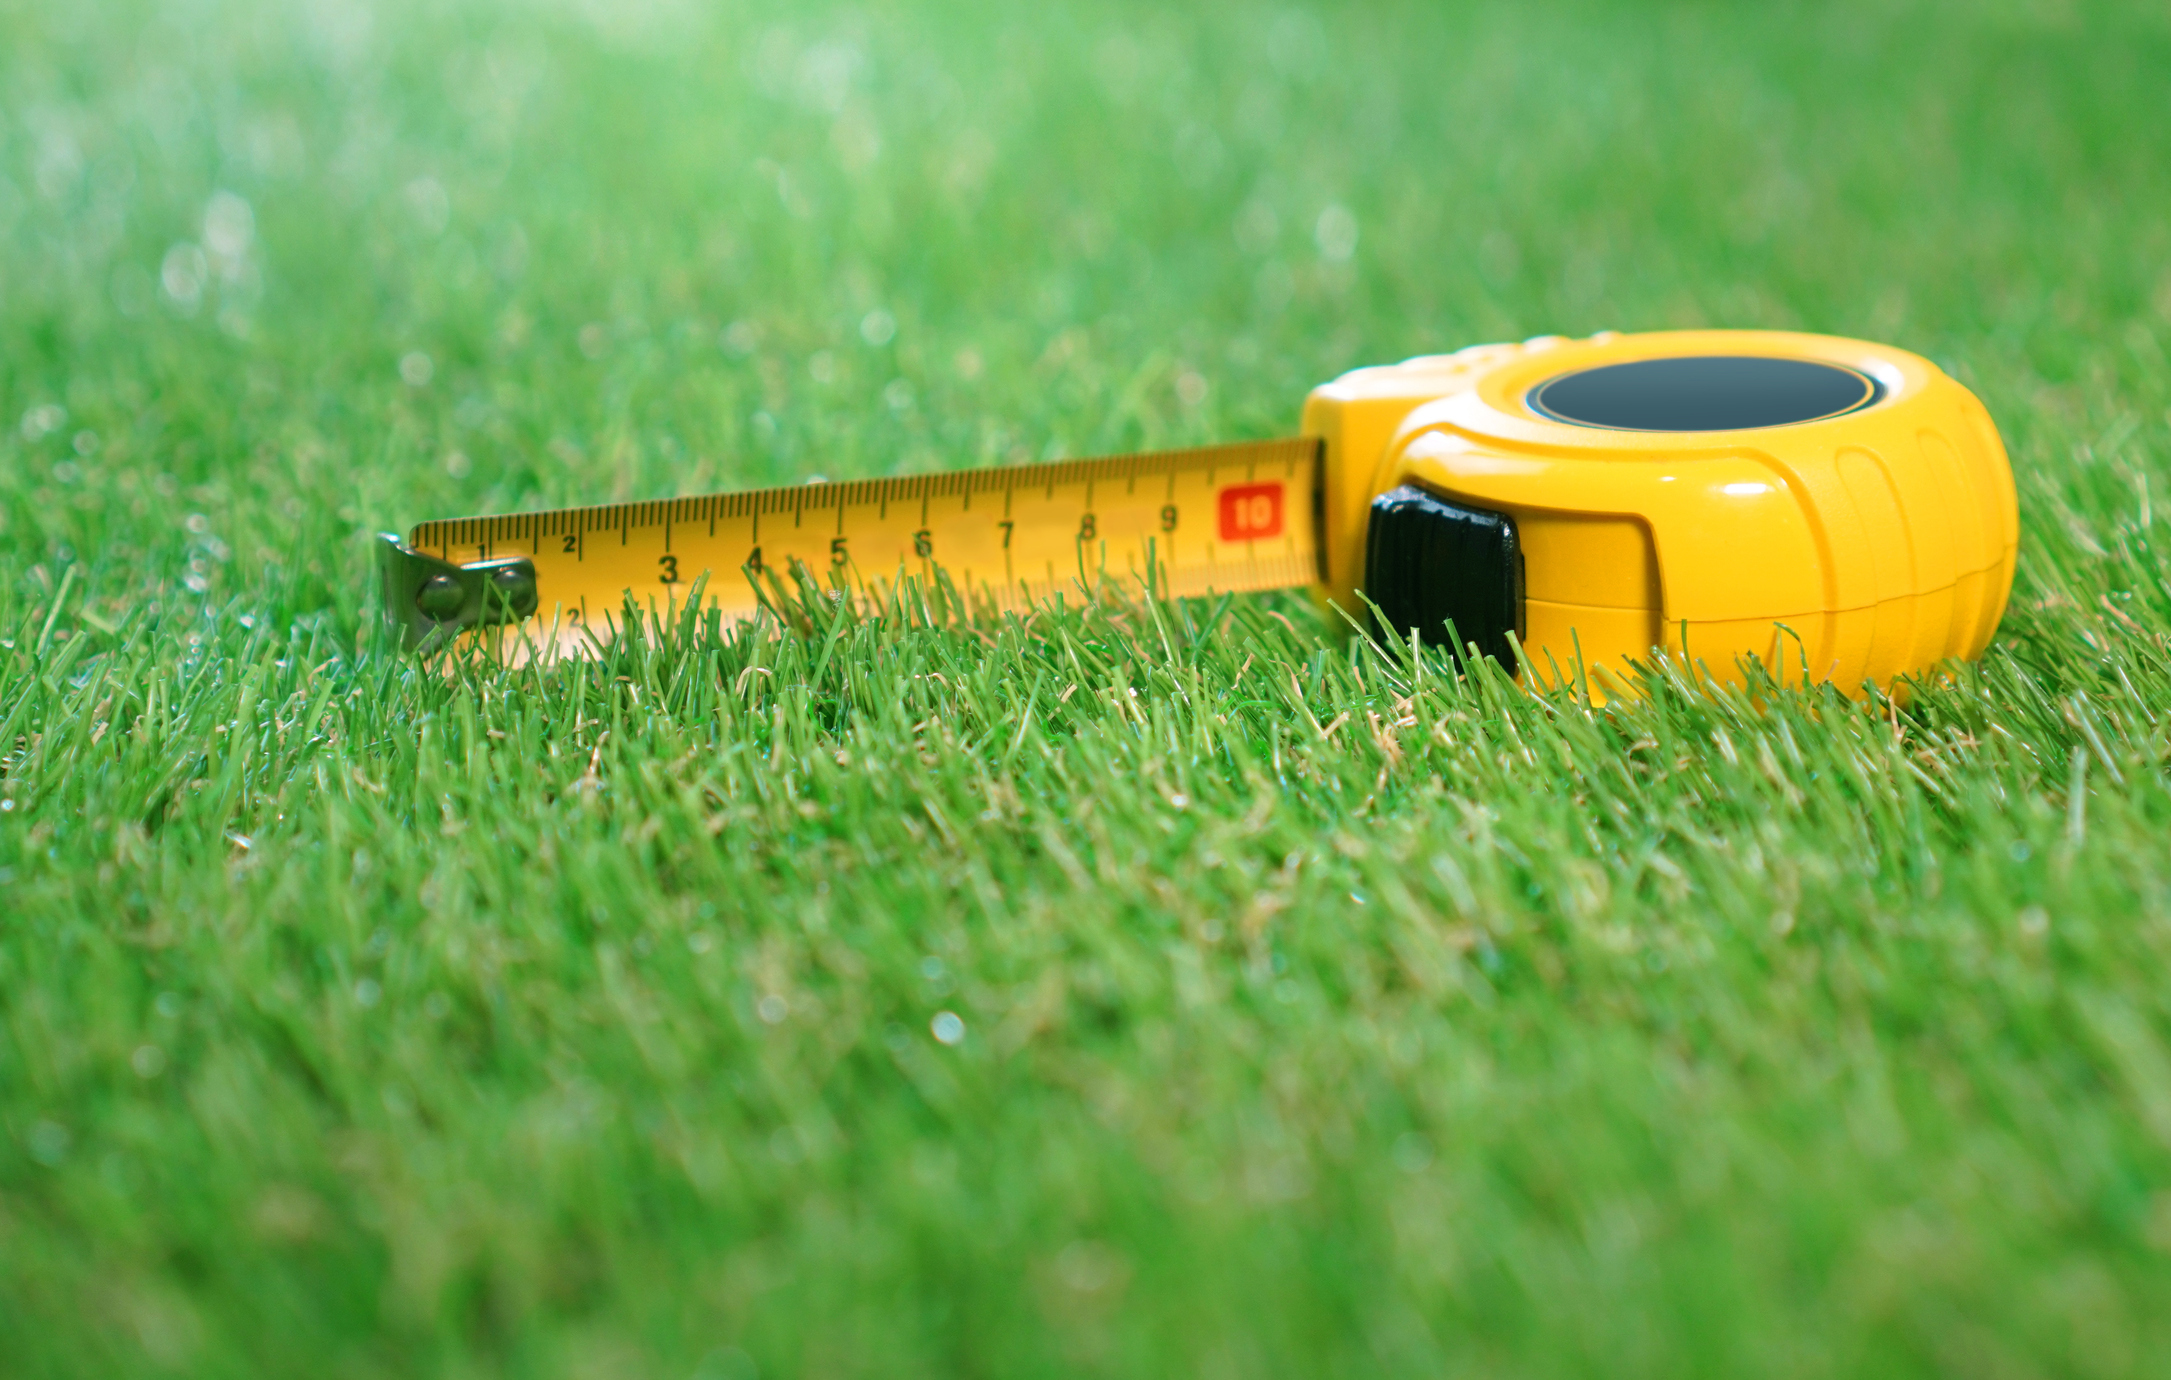 Artificial turf with a yellow tape measure